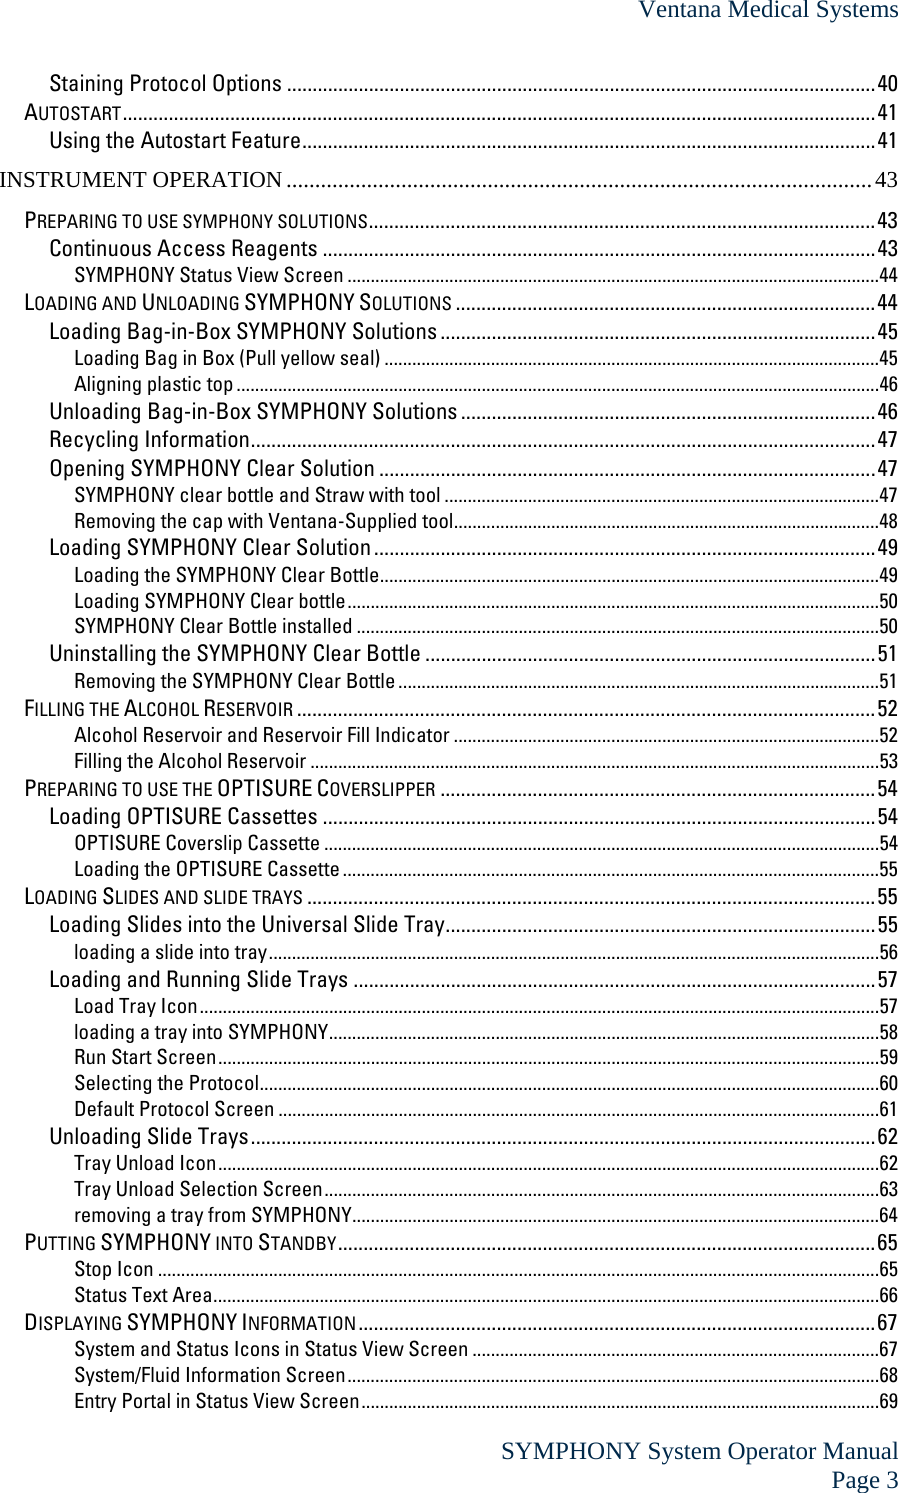 Ventana Medical Systems  SYMPHONY System Operator Manual Page 3 Staining Protocol Options ...................................................................................................................40 AUTOSTART...................................................................................................................................................41 Using the Autostart Feature................................................................................................................41 INSTRUMENT OPERATION ......................................................................................................43 PREPARING TO USE SYMPHONY SOLUTIONS...................................................................................................43 Continuous Access Reagents ............................................................................................................43 SYMPHONY Status View Screen ...................................................................................................................44 LOADING AND UNLOADING SYMPHONY SOLUTIONS ..................................................................................44 Loading Bag-in-Box SYMPHONY Solutions .....................................................................................45 Loading Bag in Box (Pull yellow seal) ...........................................................................................................45 Aligning plastic top ...........................................................................................................................................46 Unloading Bag-in-Box SYMPHONY Solutions .................................................................................46 Recycling Information..........................................................................................................................47 Opening SYMPHONY Clear Solution .................................................................................................47 SYMPHONY clear bottle and Straw with tool ..............................................................................................47 Removing the cap with Ventana-Supplied tool............................................................................................48 Loading SYMPHONY Clear Solution ..................................................................................................49 Loading the SYMPHONY Clear Bottle............................................................................................................49 Loading SYMPHONY Clear bottle...................................................................................................................50 SYMPHONY Clear Bottle installed .................................................................................................................50 Uninstalling the SYMPHONY Clear Bottle ........................................................................................51 Removing the SYMPHONY Clear Bottle ........................................................................................................51 FILLING THE ALCOHOL RESERVOIR .................................................................................................................52 Alcohol Reservoir and Reservoir Fill Indicator ............................................................................................52 Filling the Alcohol Reservoir ...........................................................................................................................53 PREPARING TO USE THE OPTISURE COVERSLIPPER .....................................................................................54 Loading OPTISURE Cassettes ............................................................................................................54 OPTISURE Coverslip Cassette ........................................................................................................................54 Loading the OPTISURE Cassette ....................................................................................................................55 LOADING SLIDES AND SLIDE TRAYS ...............................................................................................................55 Loading Slides into the Universal Slide Tray....................................................................................55 loading a slide into tray....................................................................................................................................56 Loading and Running Slide Trays ......................................................................................................57 Load Tray Icon...................................................................................................................................................57 loading a tray into SYMPHONY.......................................................................................................................58 Run Start Screen...............................................................................................................................................59 Selecting the Protocol......................................................................................................................................60 Default Protocol Screen ..................................................................................................................................61 Unloading Slide Trays..........................................................................................................................62 Tray Unload Icon...............................................................................................................................................62 Tray Unload Selection Screen........................................................................................................................63 removing a tray from SYMPHONY..................................................................................................................64 PUTTING SYMPHONY INTO STANDBY.........................................................................................................65 Stop Icon ............................................................................................................................................................65 Status Text Area................................................................................................................................................66 DISPLAYING SYMPHONY INFORMATION.....................................................................................................67 System and Status Icons in Status View Screen ........................................................................................67 System/Fluid Information Screen...................................................................................................................68 Entry Portal in Status View Screen................................................................................................................69 